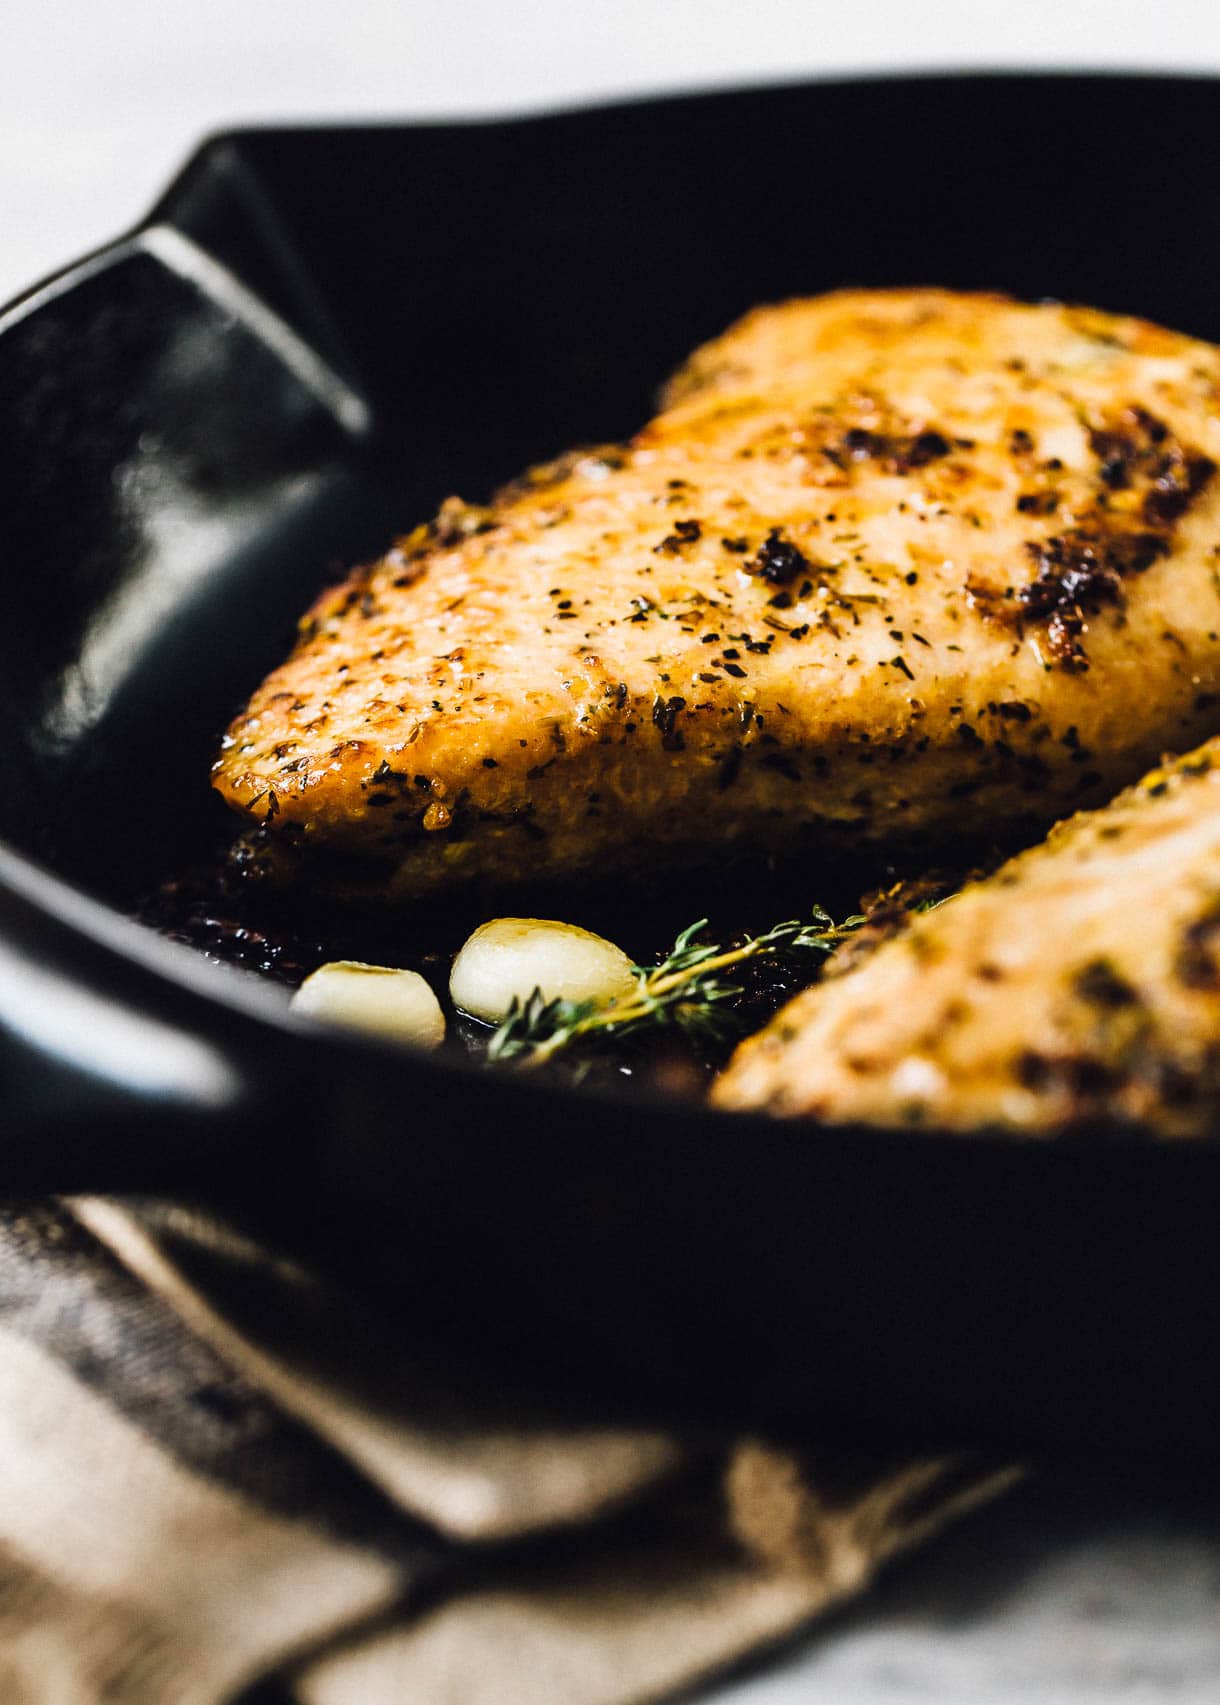 turkey tenderloin being cooked in a cast iron skillet